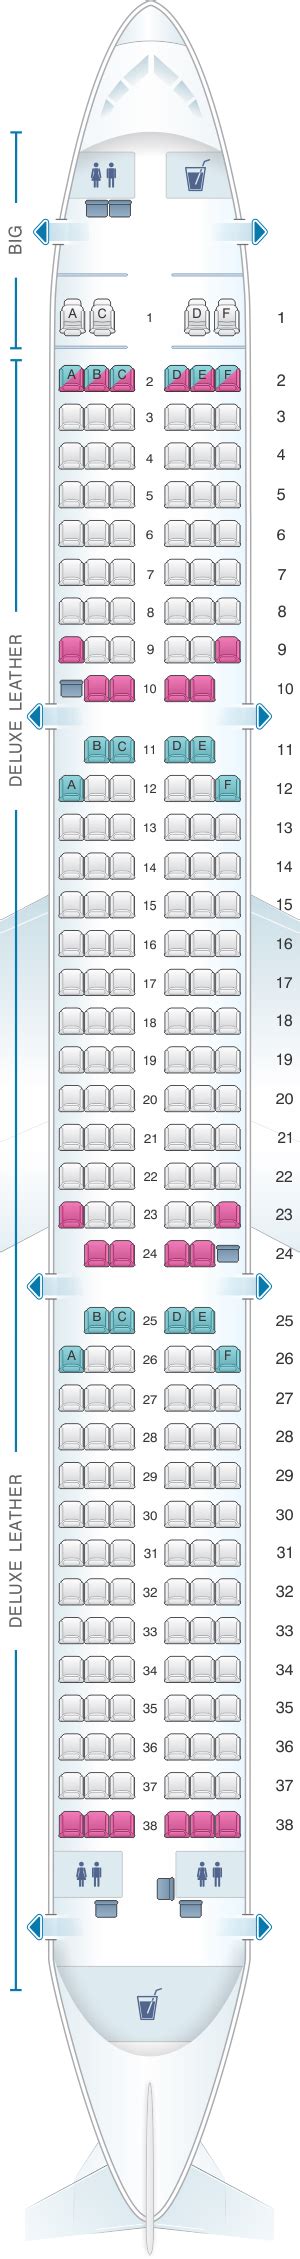 First Class Spirit Airlines Seating Chart Hawaiian Airlines First